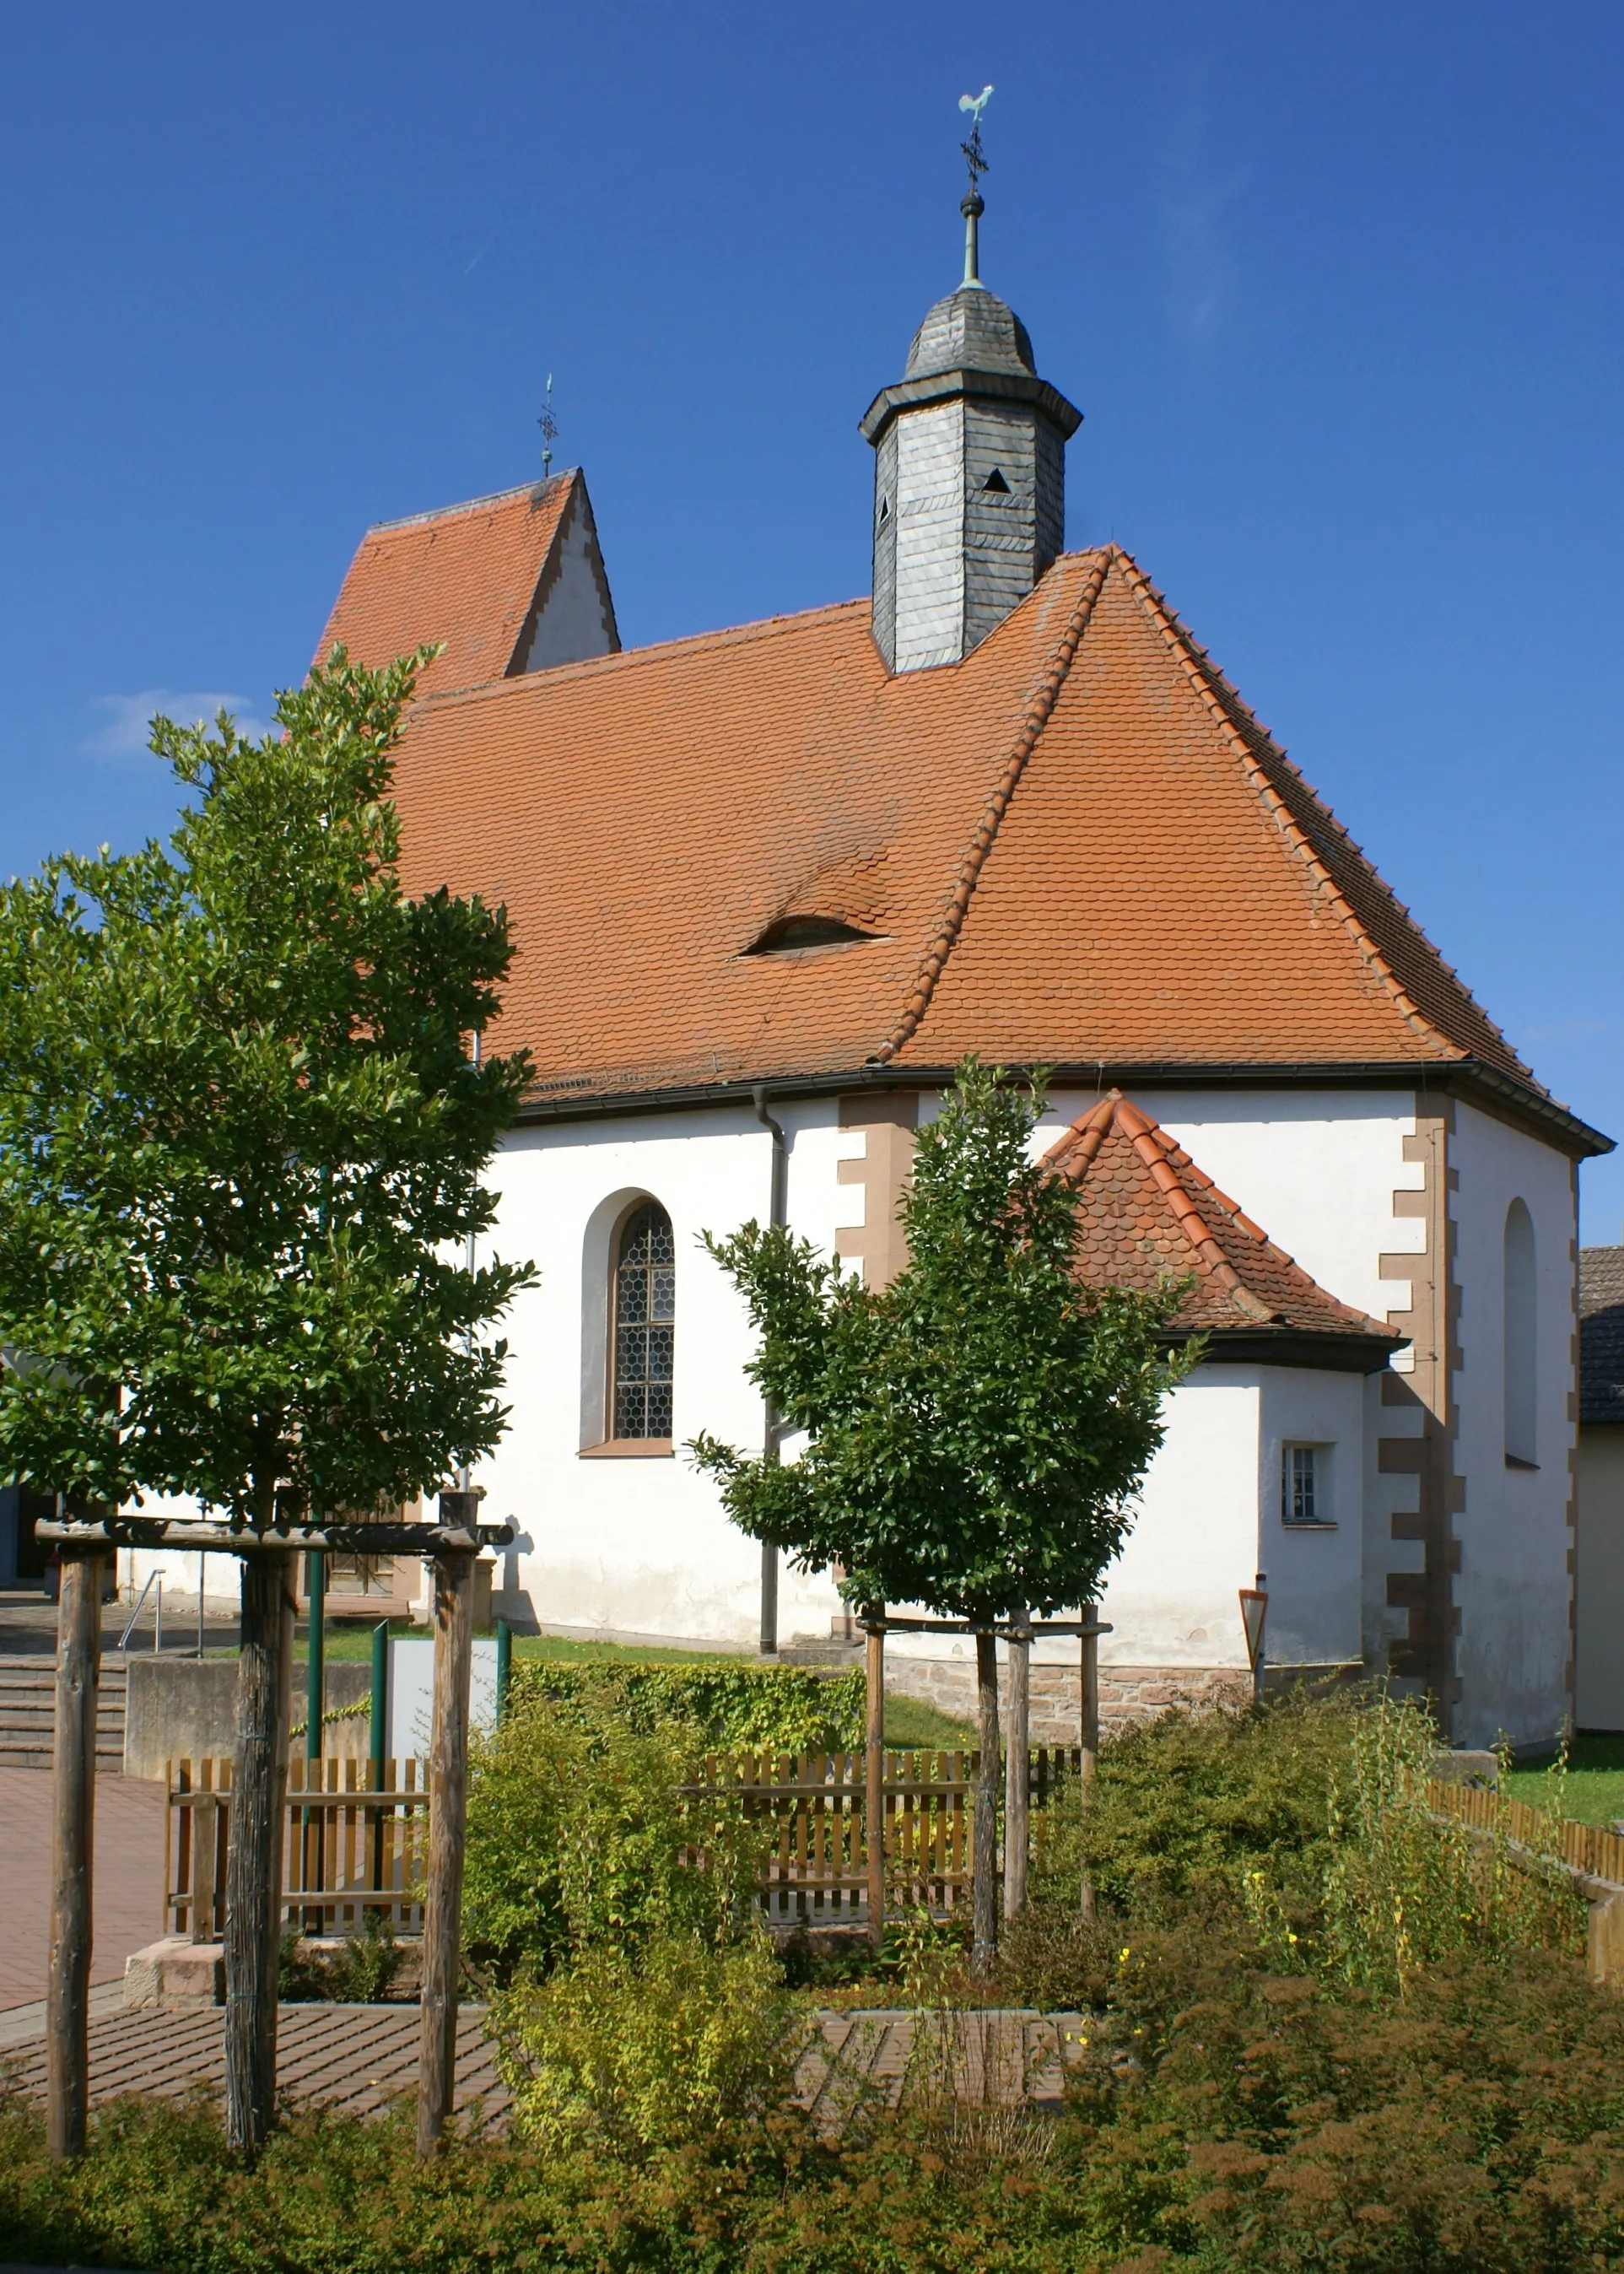 Photo showing: The church St. Andreas in Wiesthal